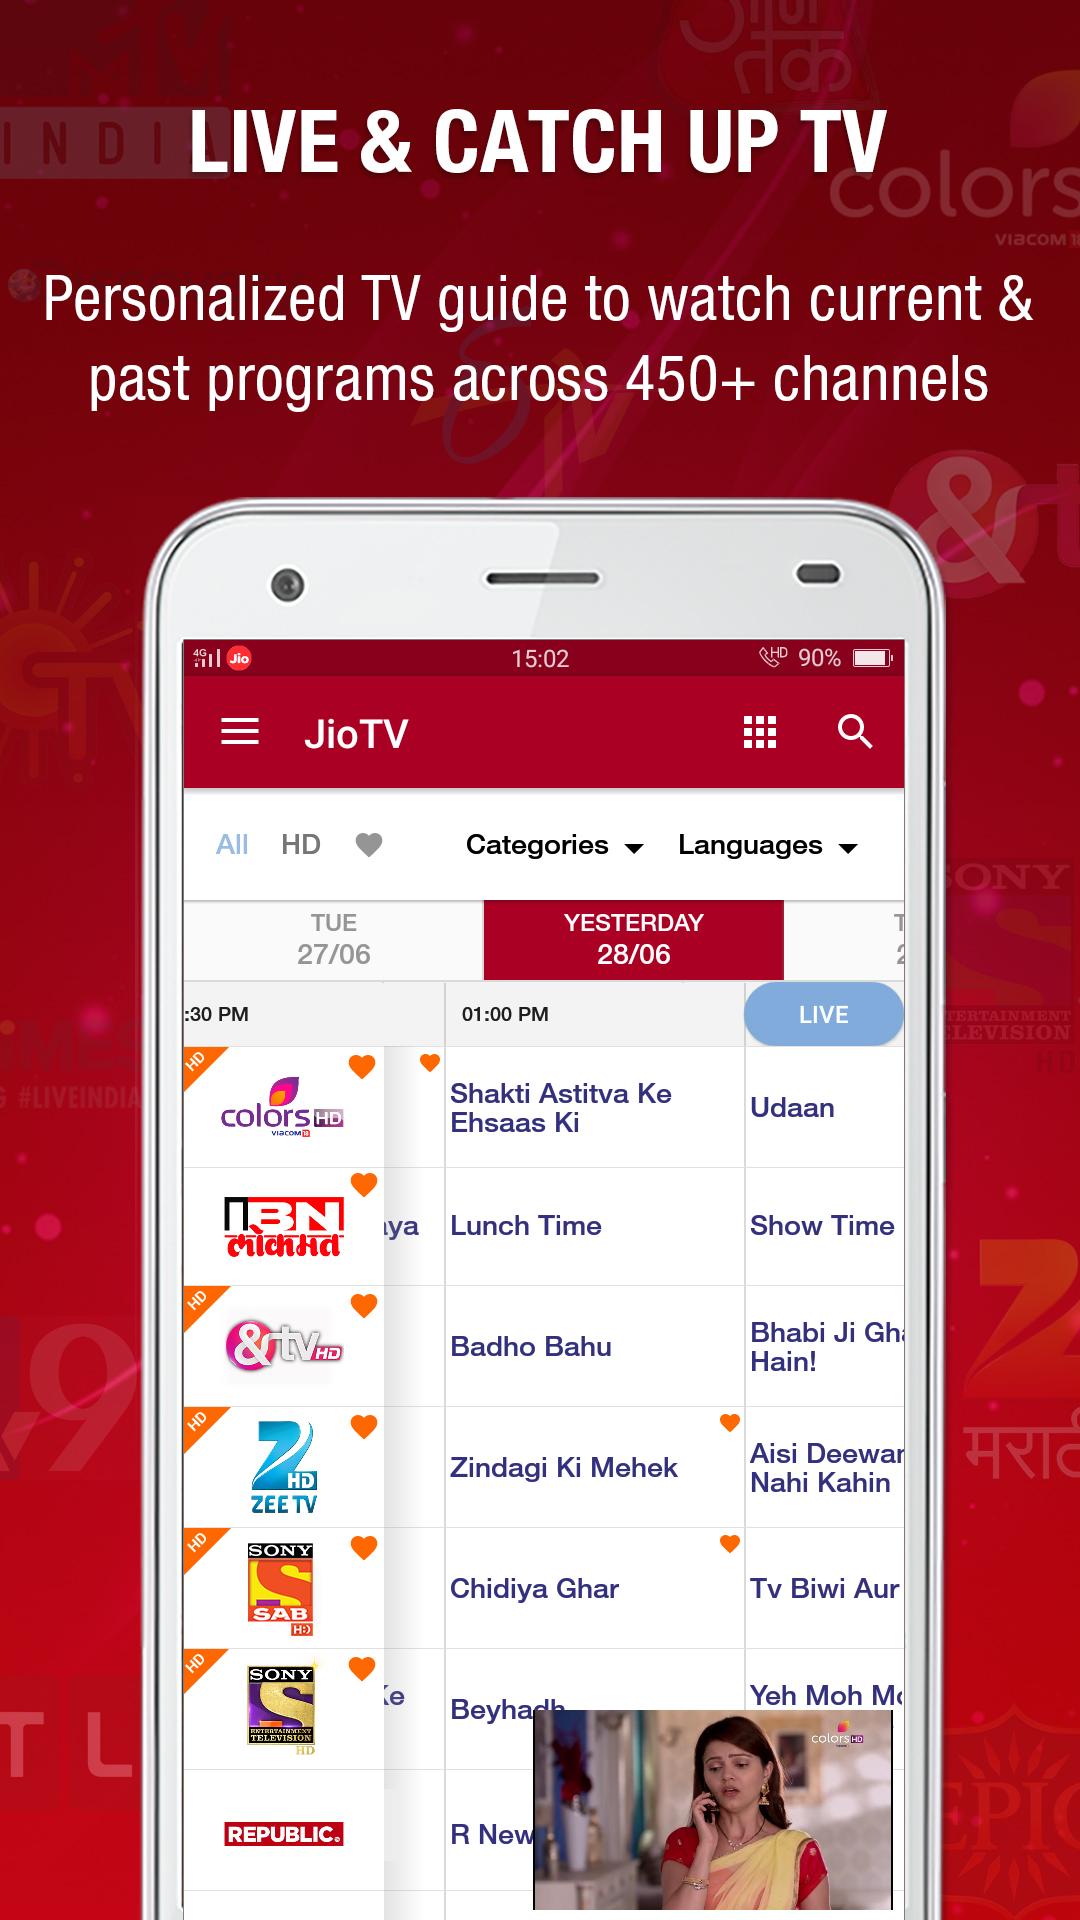 41 HQ Photos Sports Tv Schedule App : Live news and live sports coming to TV app